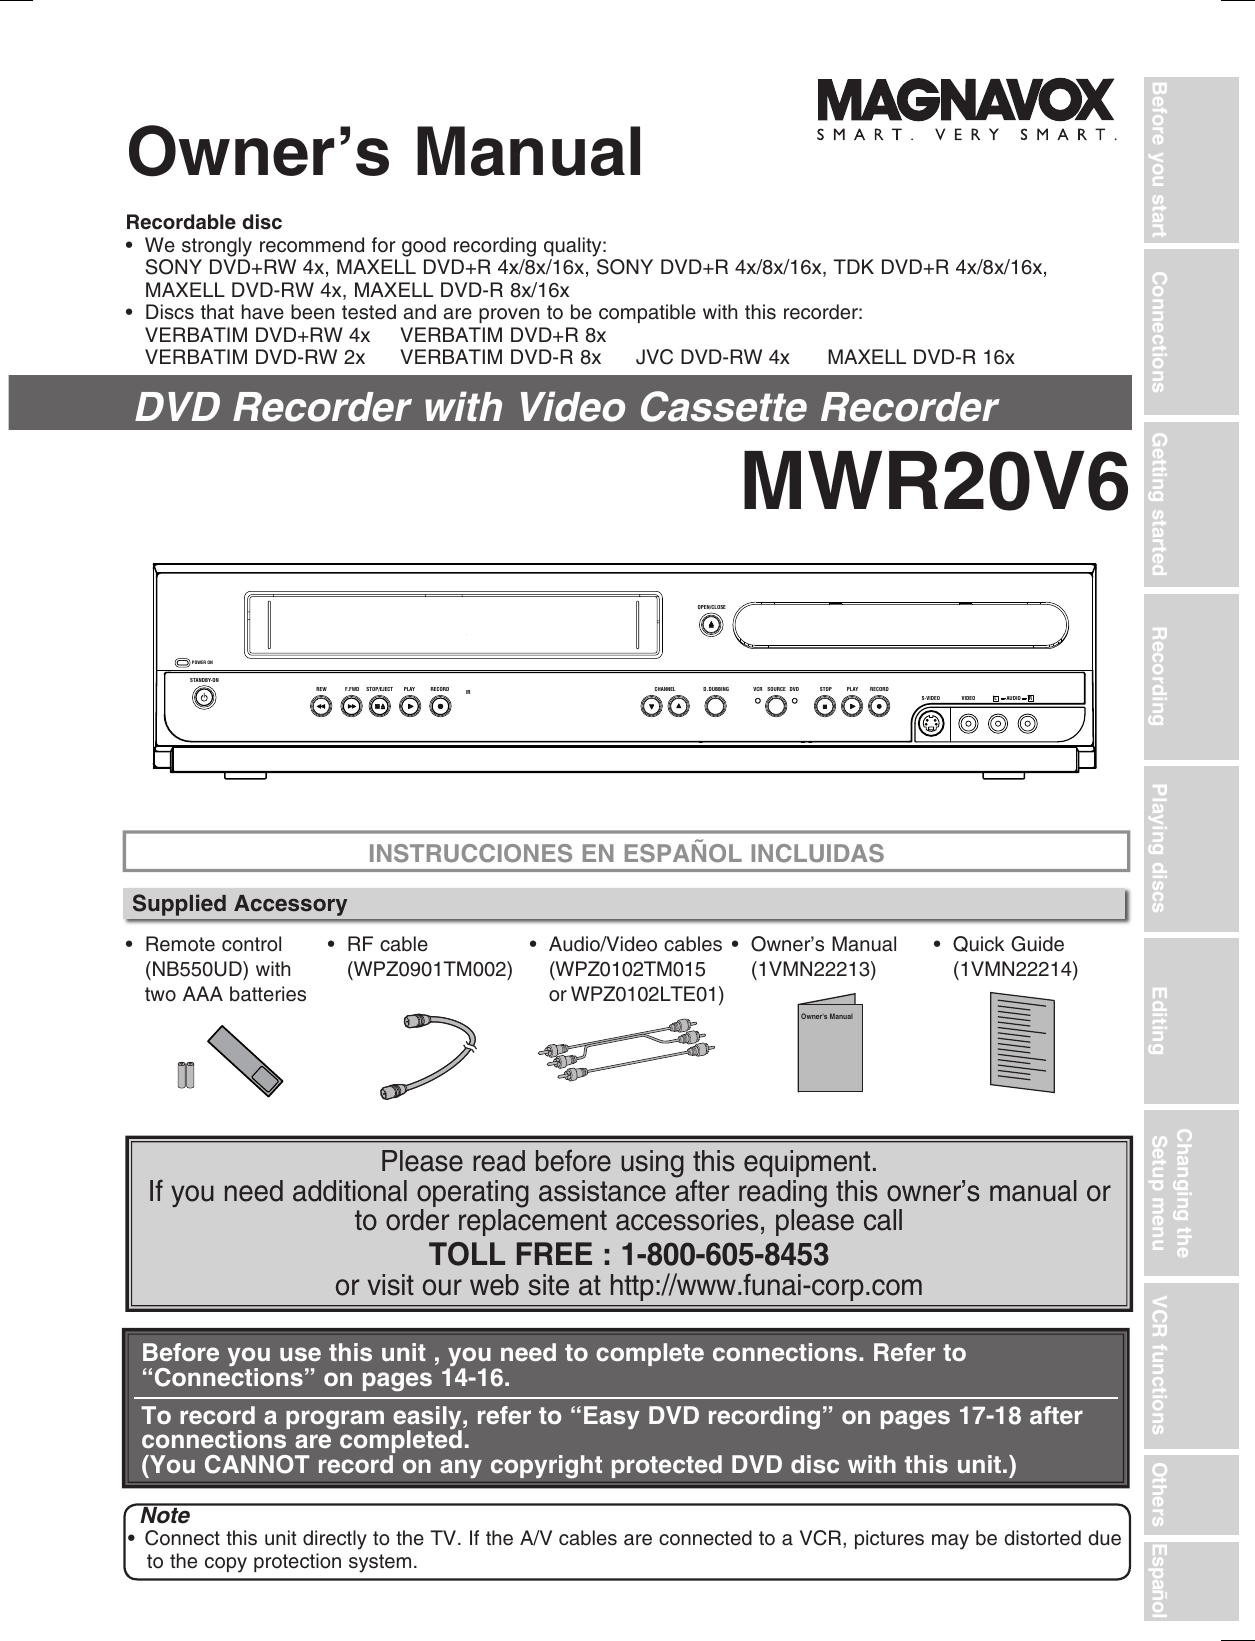 Magnavox Mwr20V6 Owners Manual ManualsLib Makes It Easy To Find Manuals